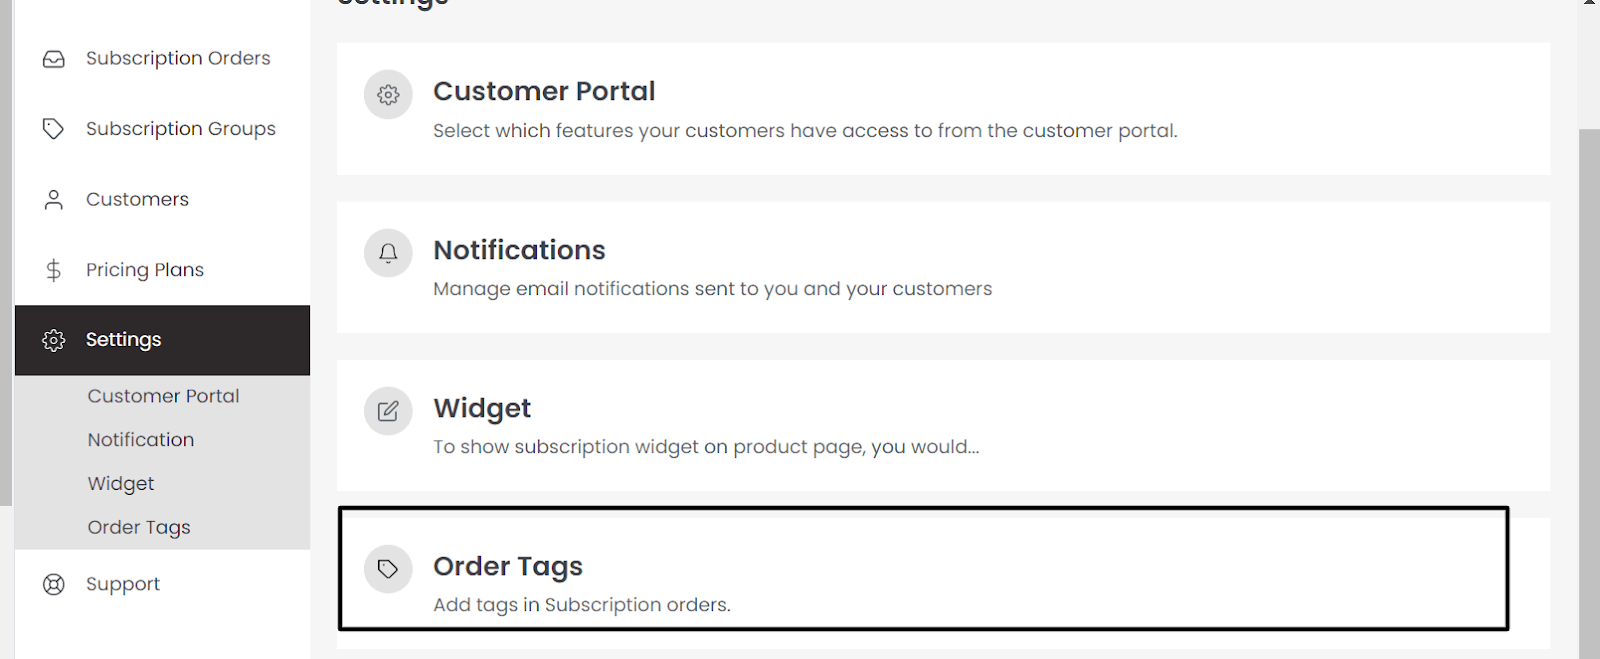 Guidelines for tagging recurring orders and managing subscriptions